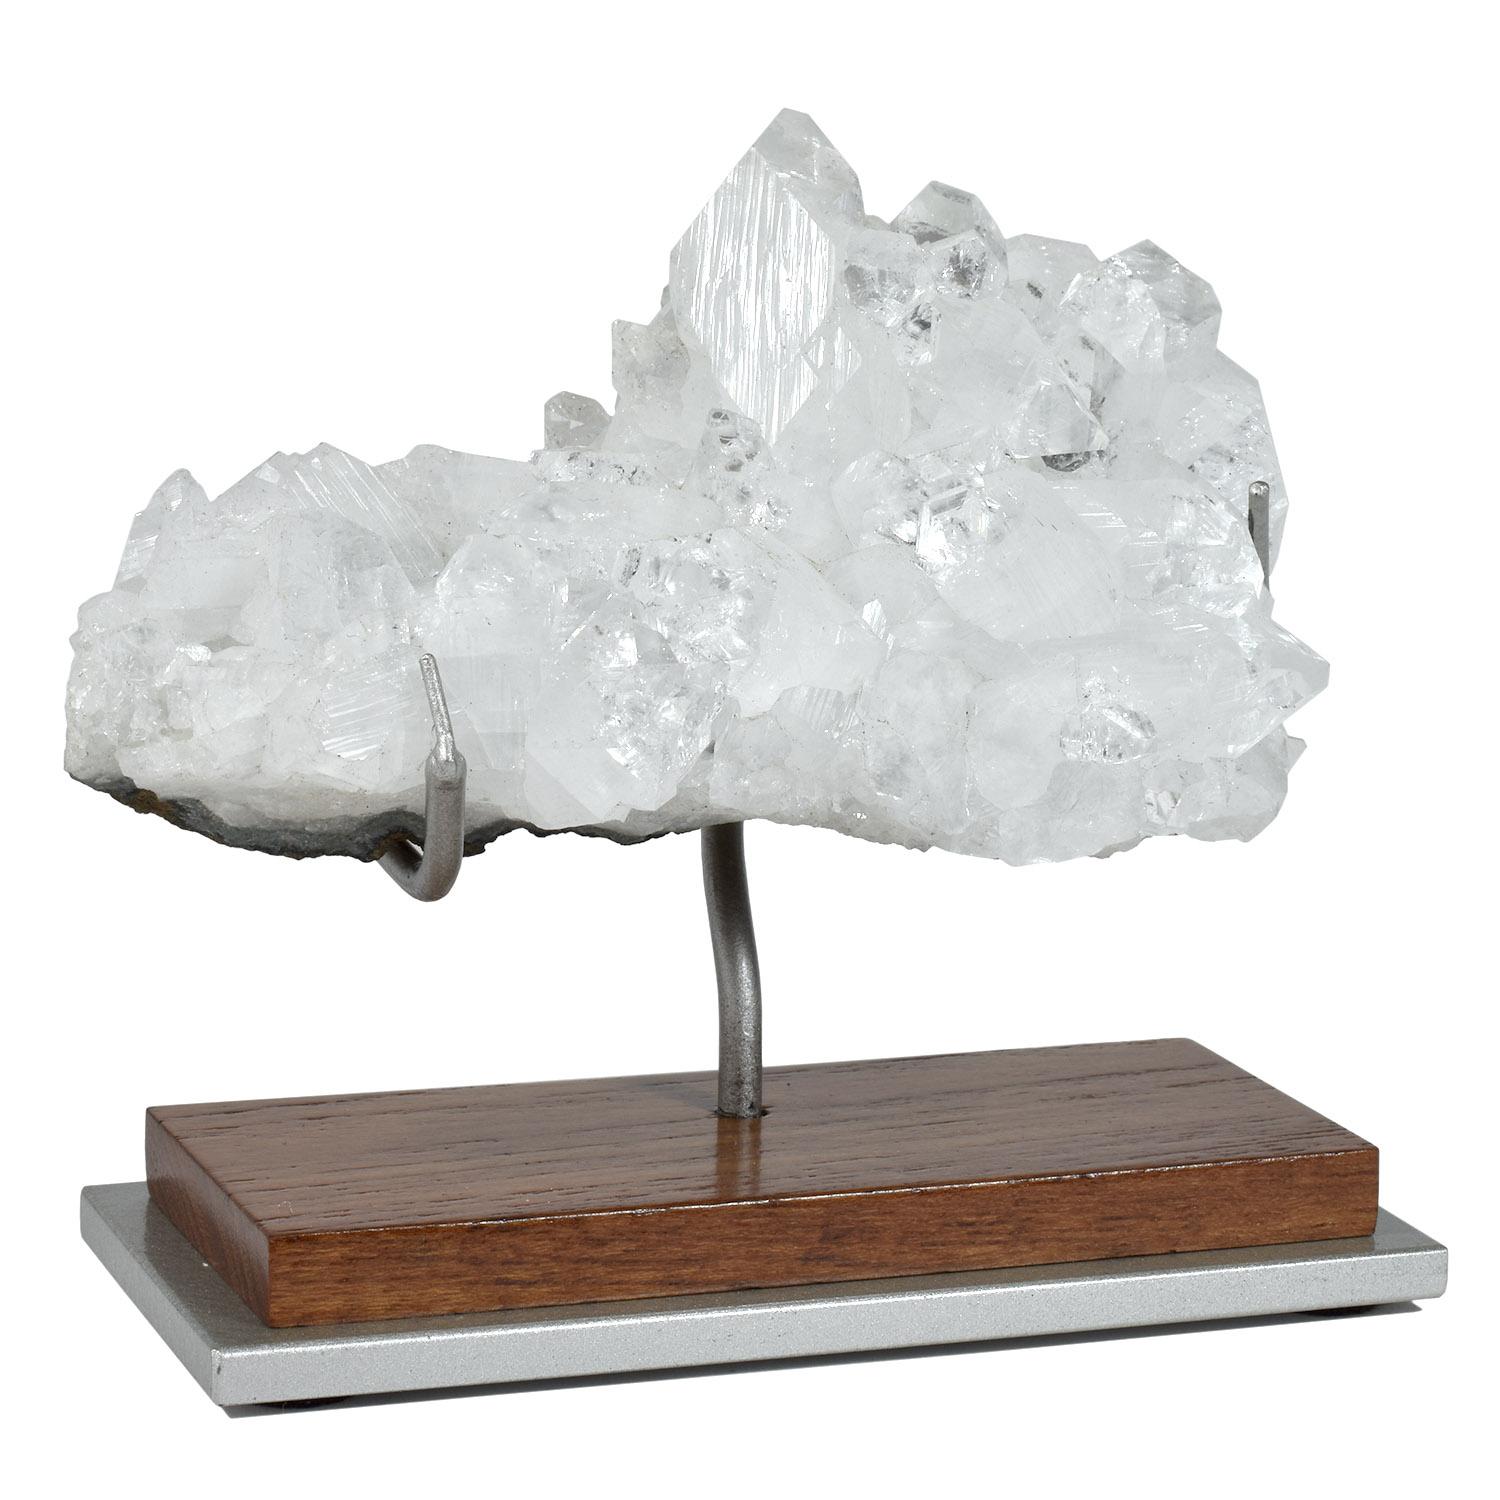 Mounted naturally-formed Indian mineral: clear apophyllite

An attractive specimen that reflects the light similarly to a multifaceted gem giving the specimen an unusual brightness. The presentation enhances the sculptural qualities and accentuates